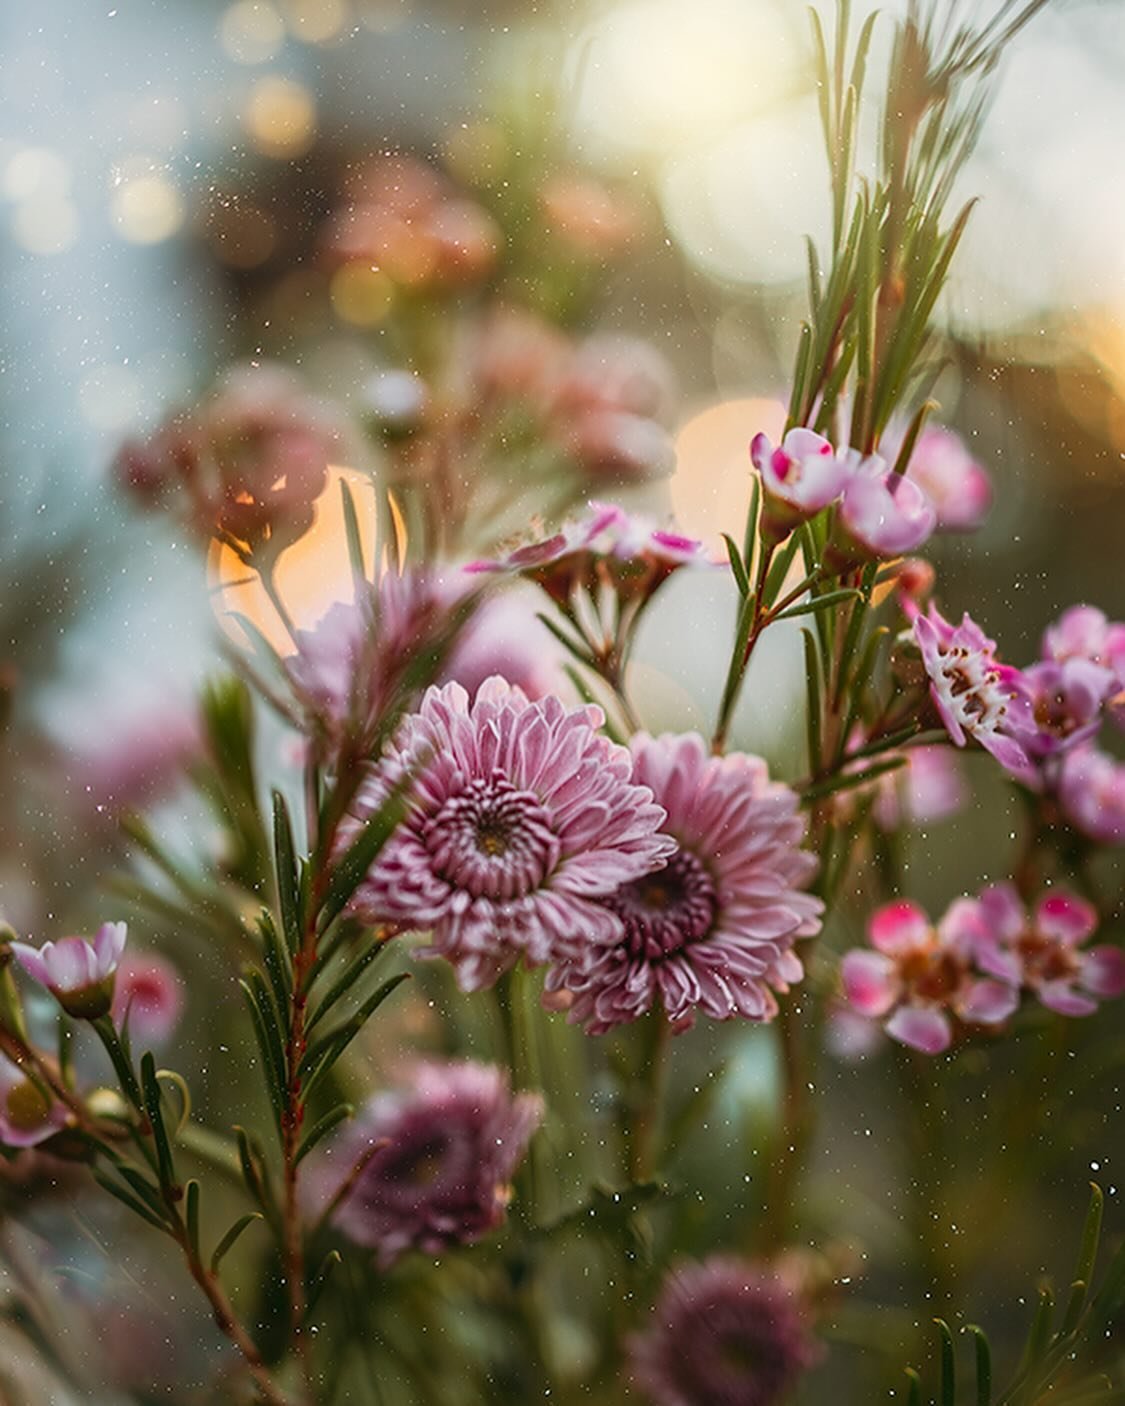 Some little flowers that I planted from seed are starting to bloom and I can't wait to take a few images with them 😊

🌸 Flower Photography Mini-workshop news: everyone on the waitlist should be getting an email with all the details to sign up for t